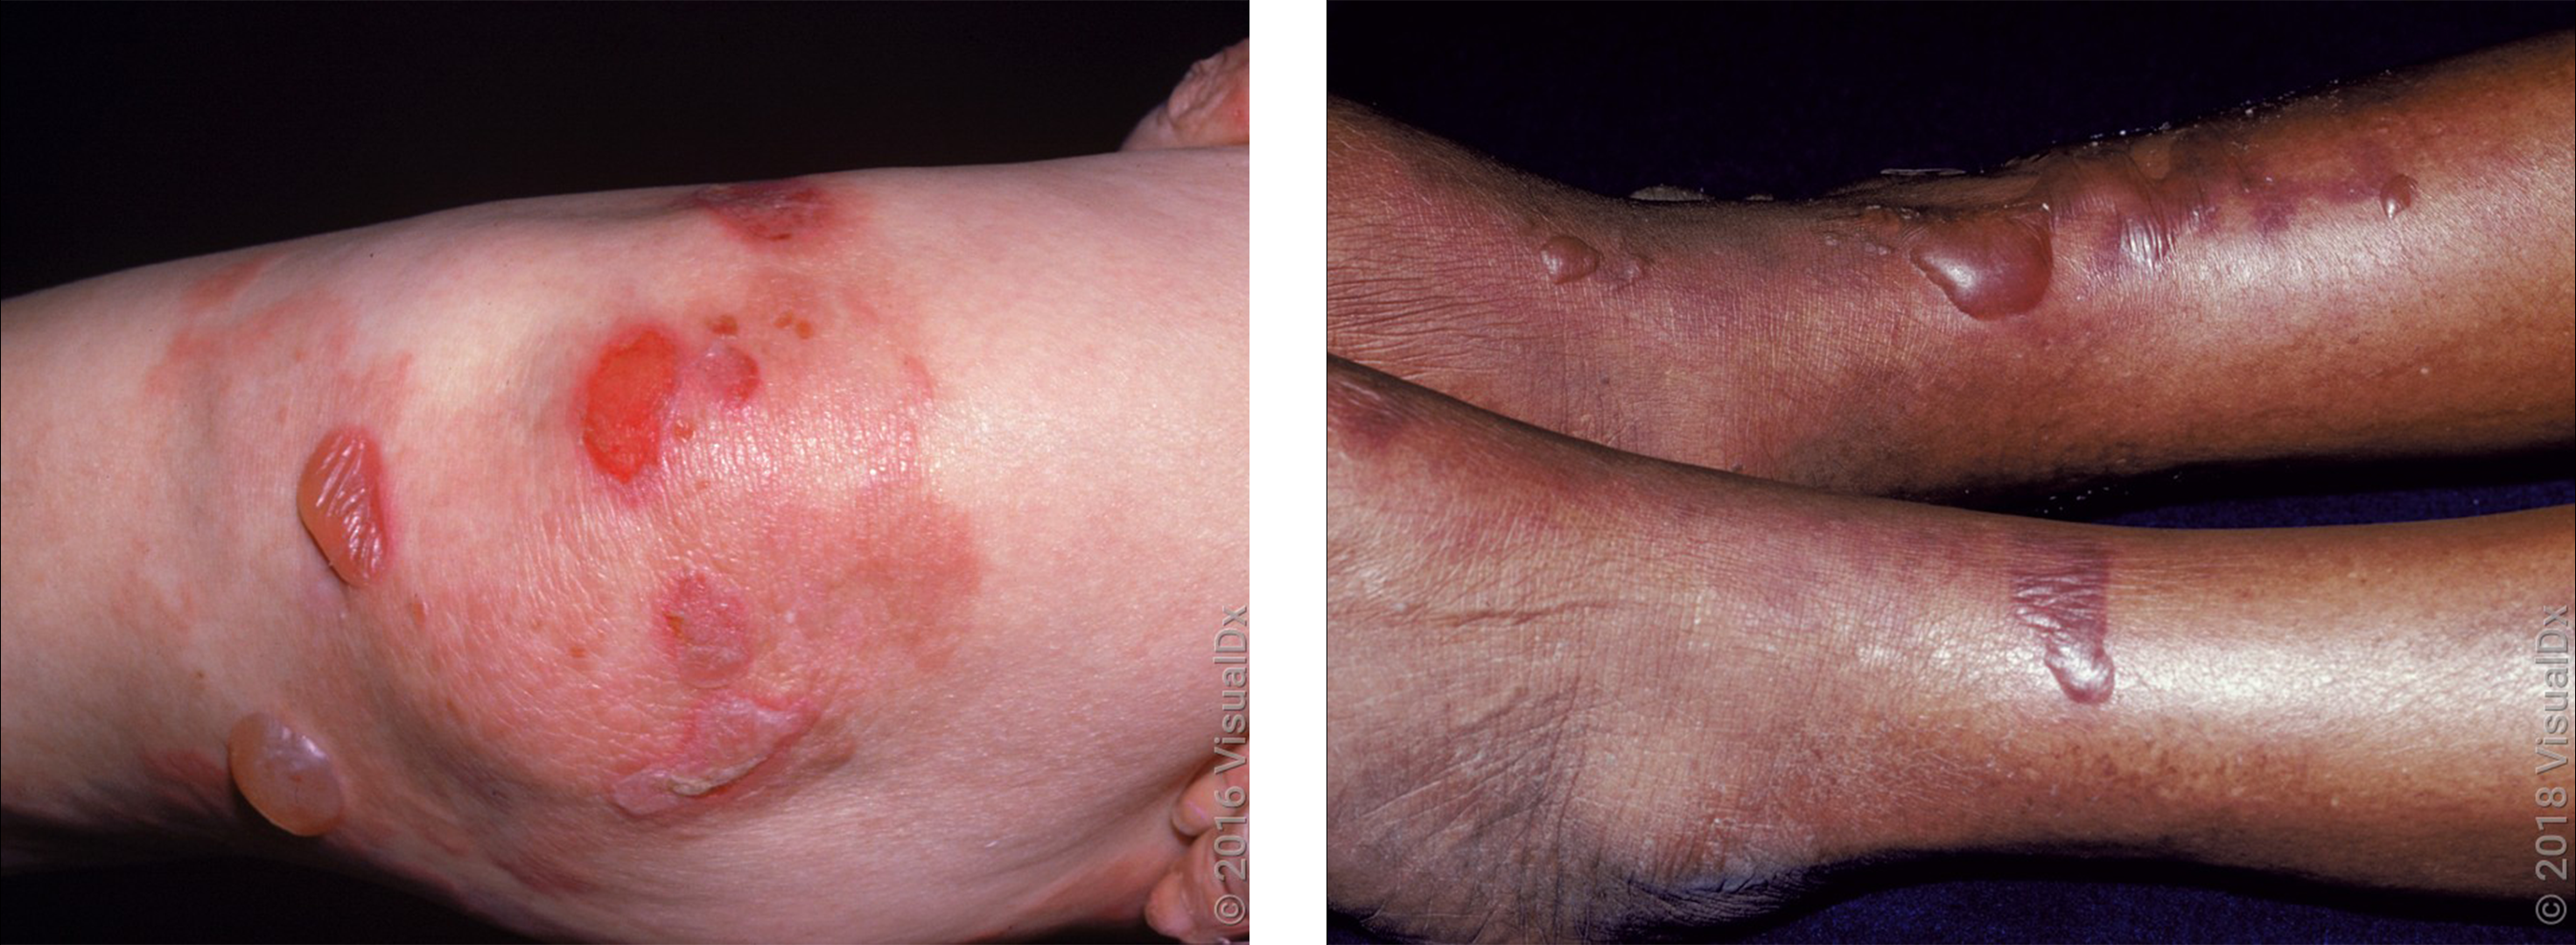 Left: Large blisters, sores, and red patches on the knee in autoimmune pemphigoid. Right: Large, fluid-filled blisters on both legs with a purple rash in autoimmune pemphigoid. 